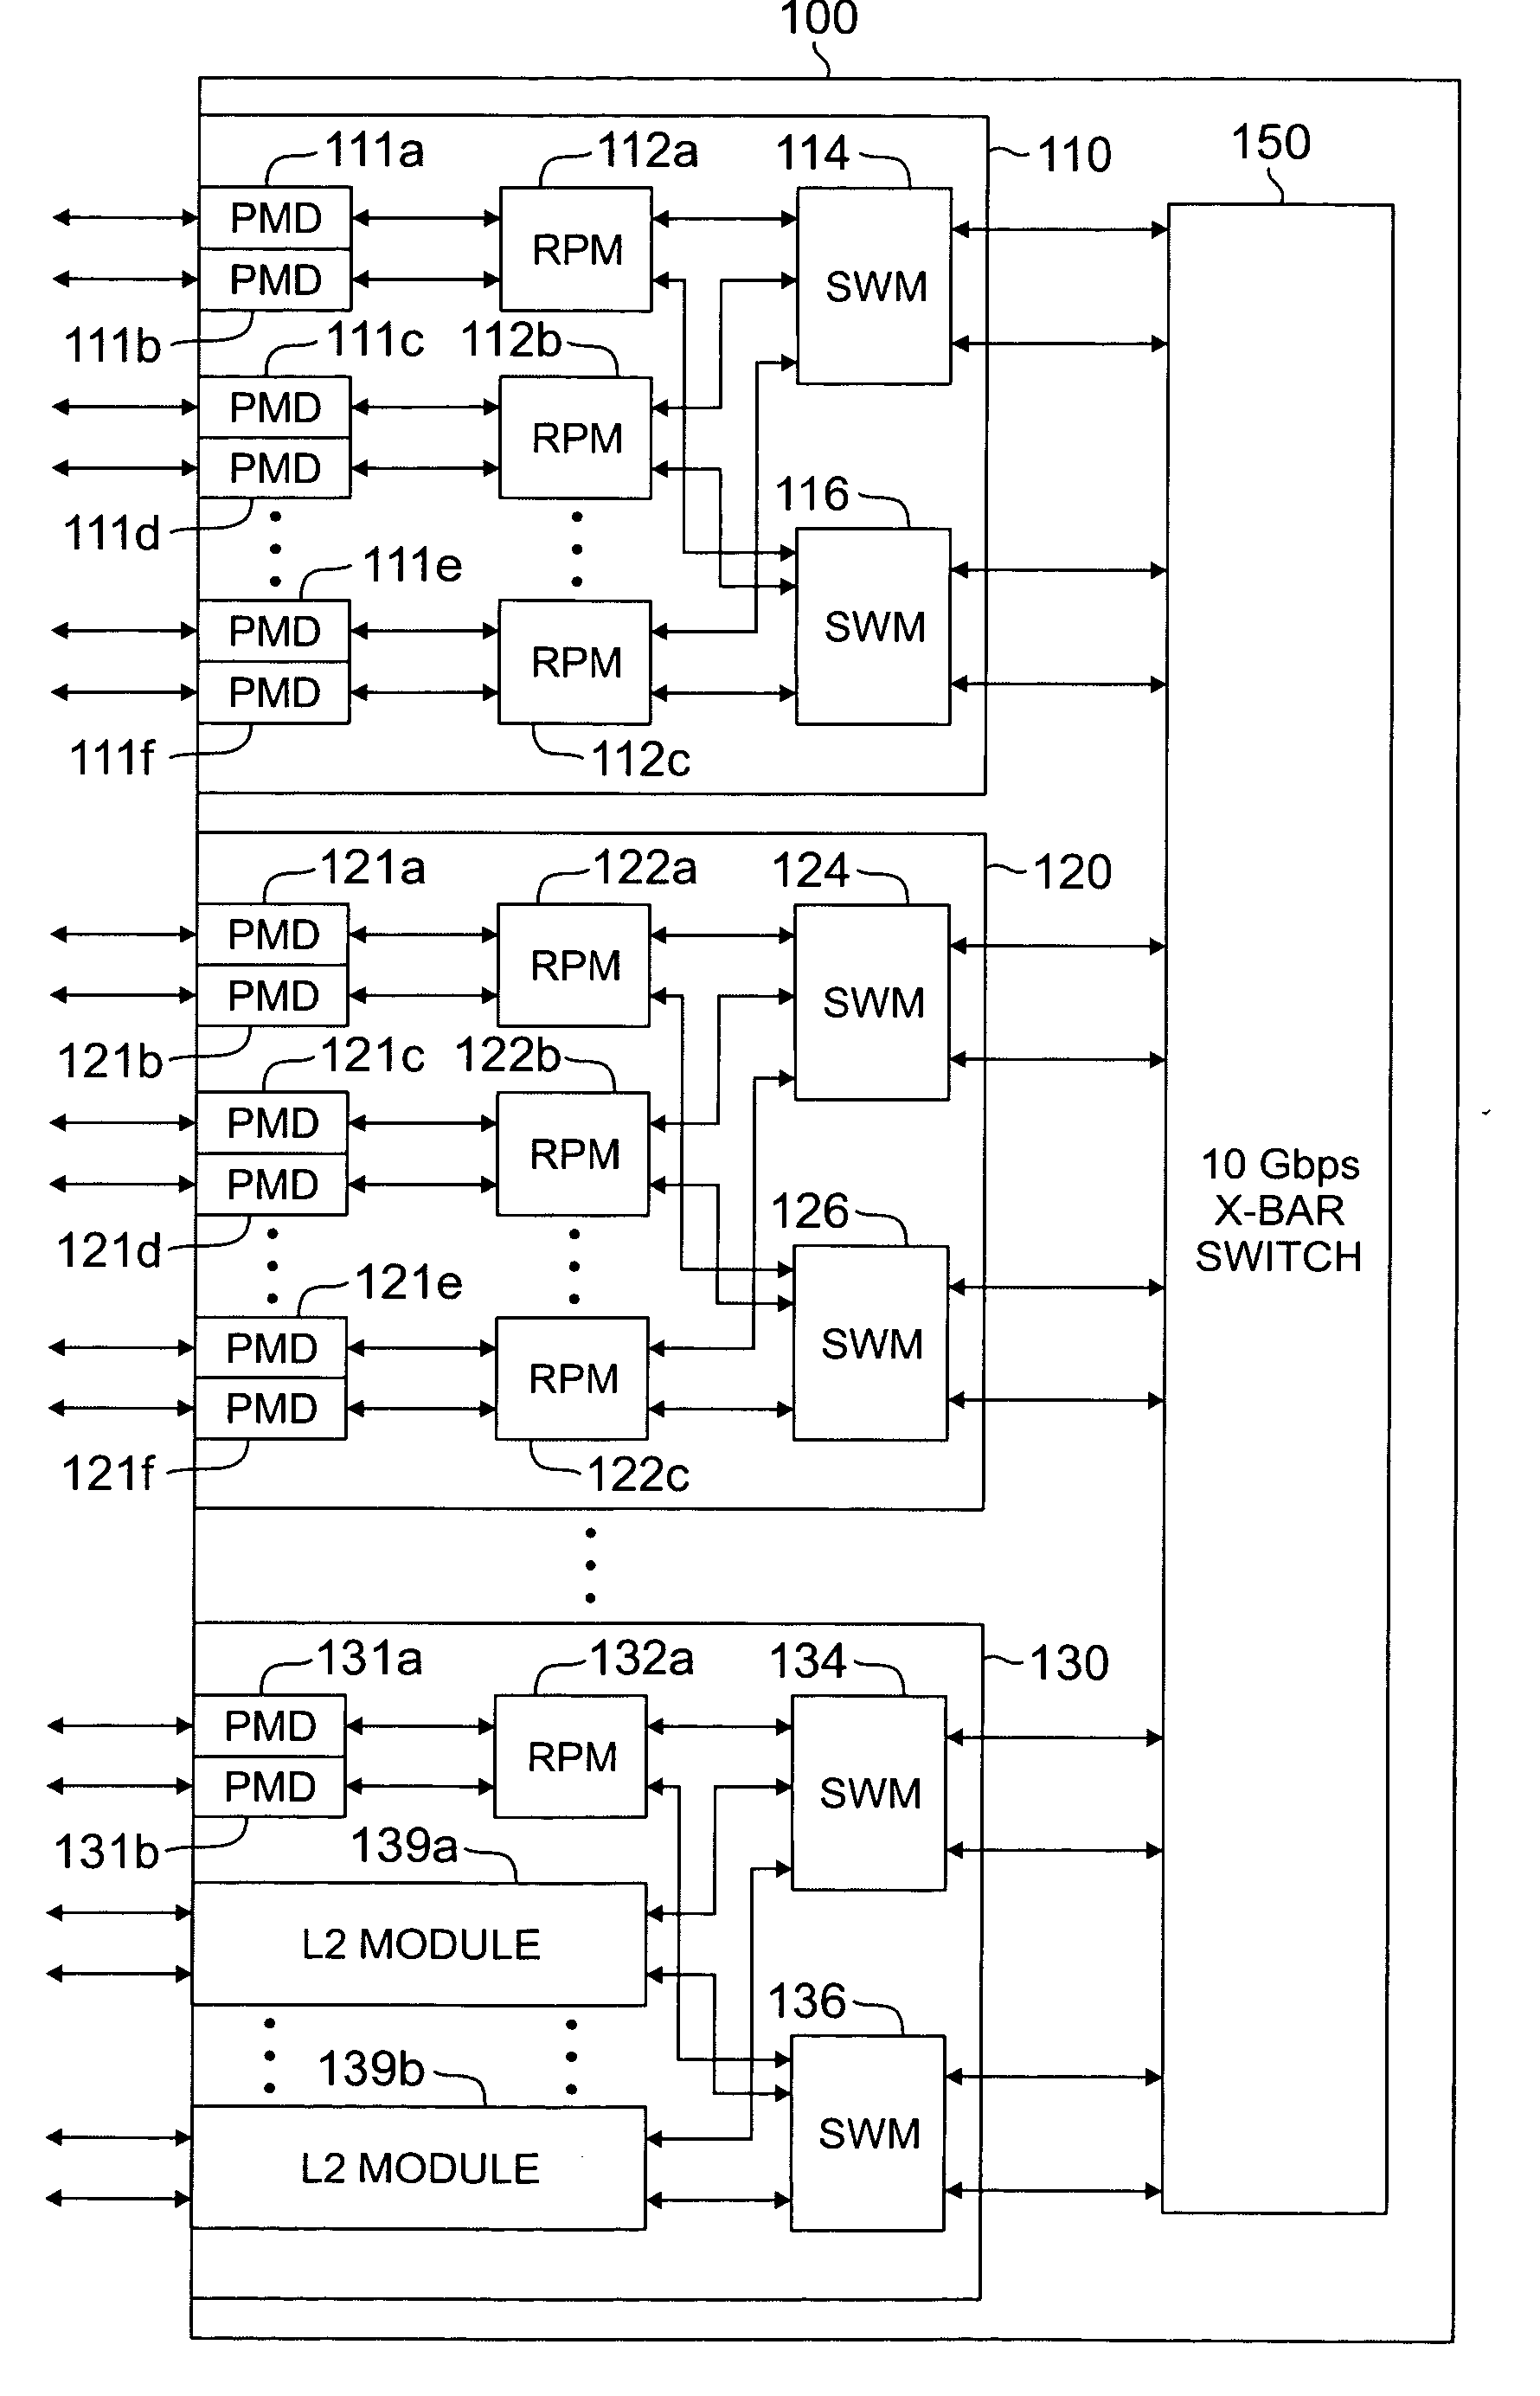 Apparatus and method for multi-protocol route redistribution in a massively parallel router